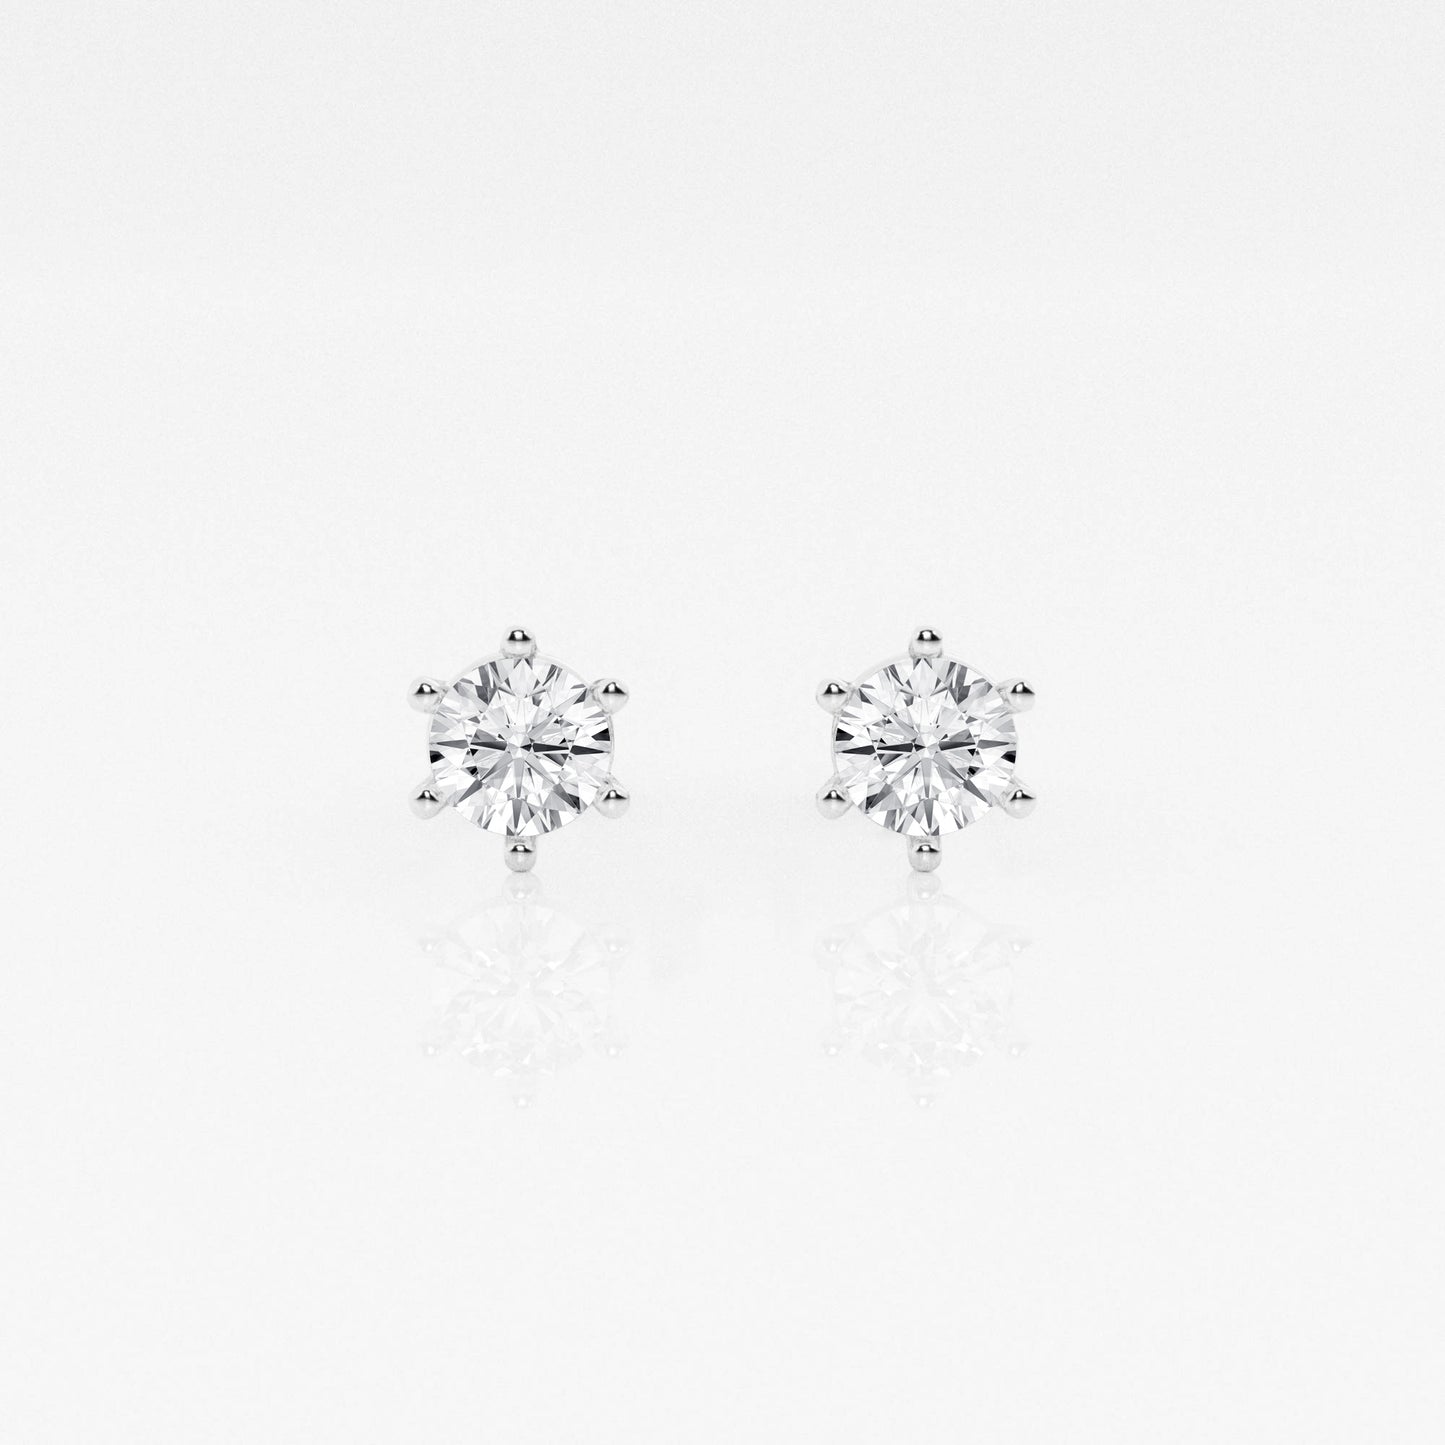 Round Solitaire earring with six prongs